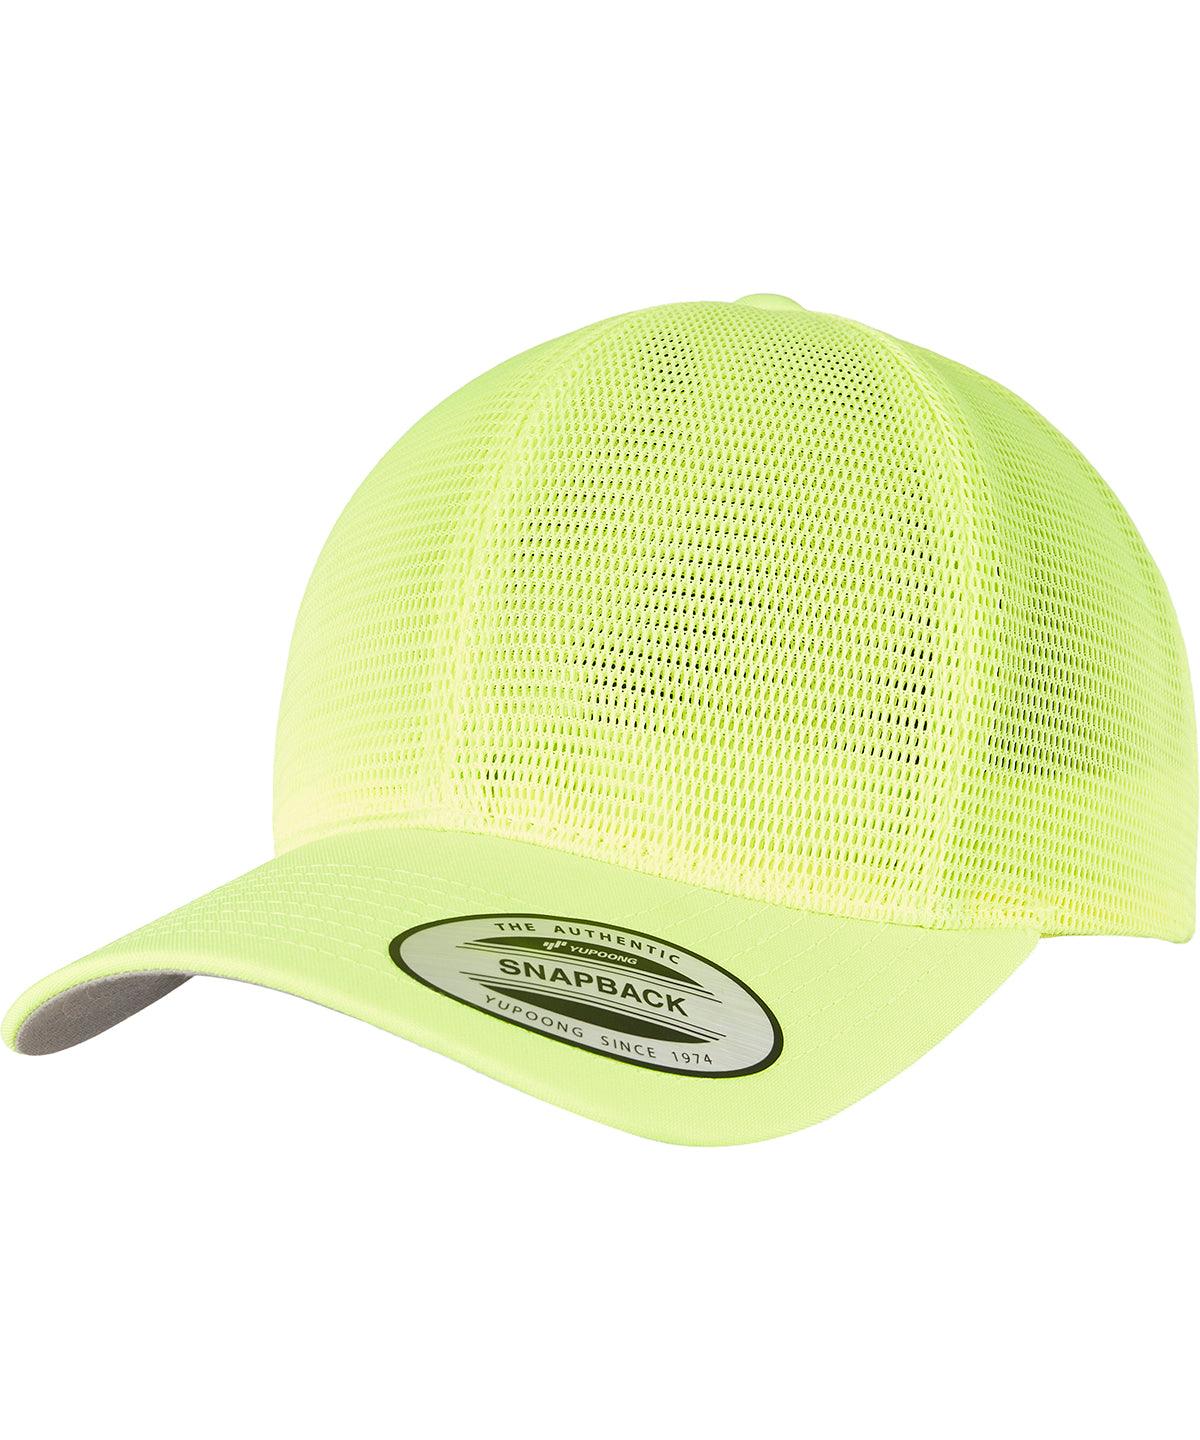 Neon Yellow - 360° omnimesh cap (6360) Caps Flexfit by Yupoong Headwear, New For 2021, New Styles For 2021 Schoolwear Centres